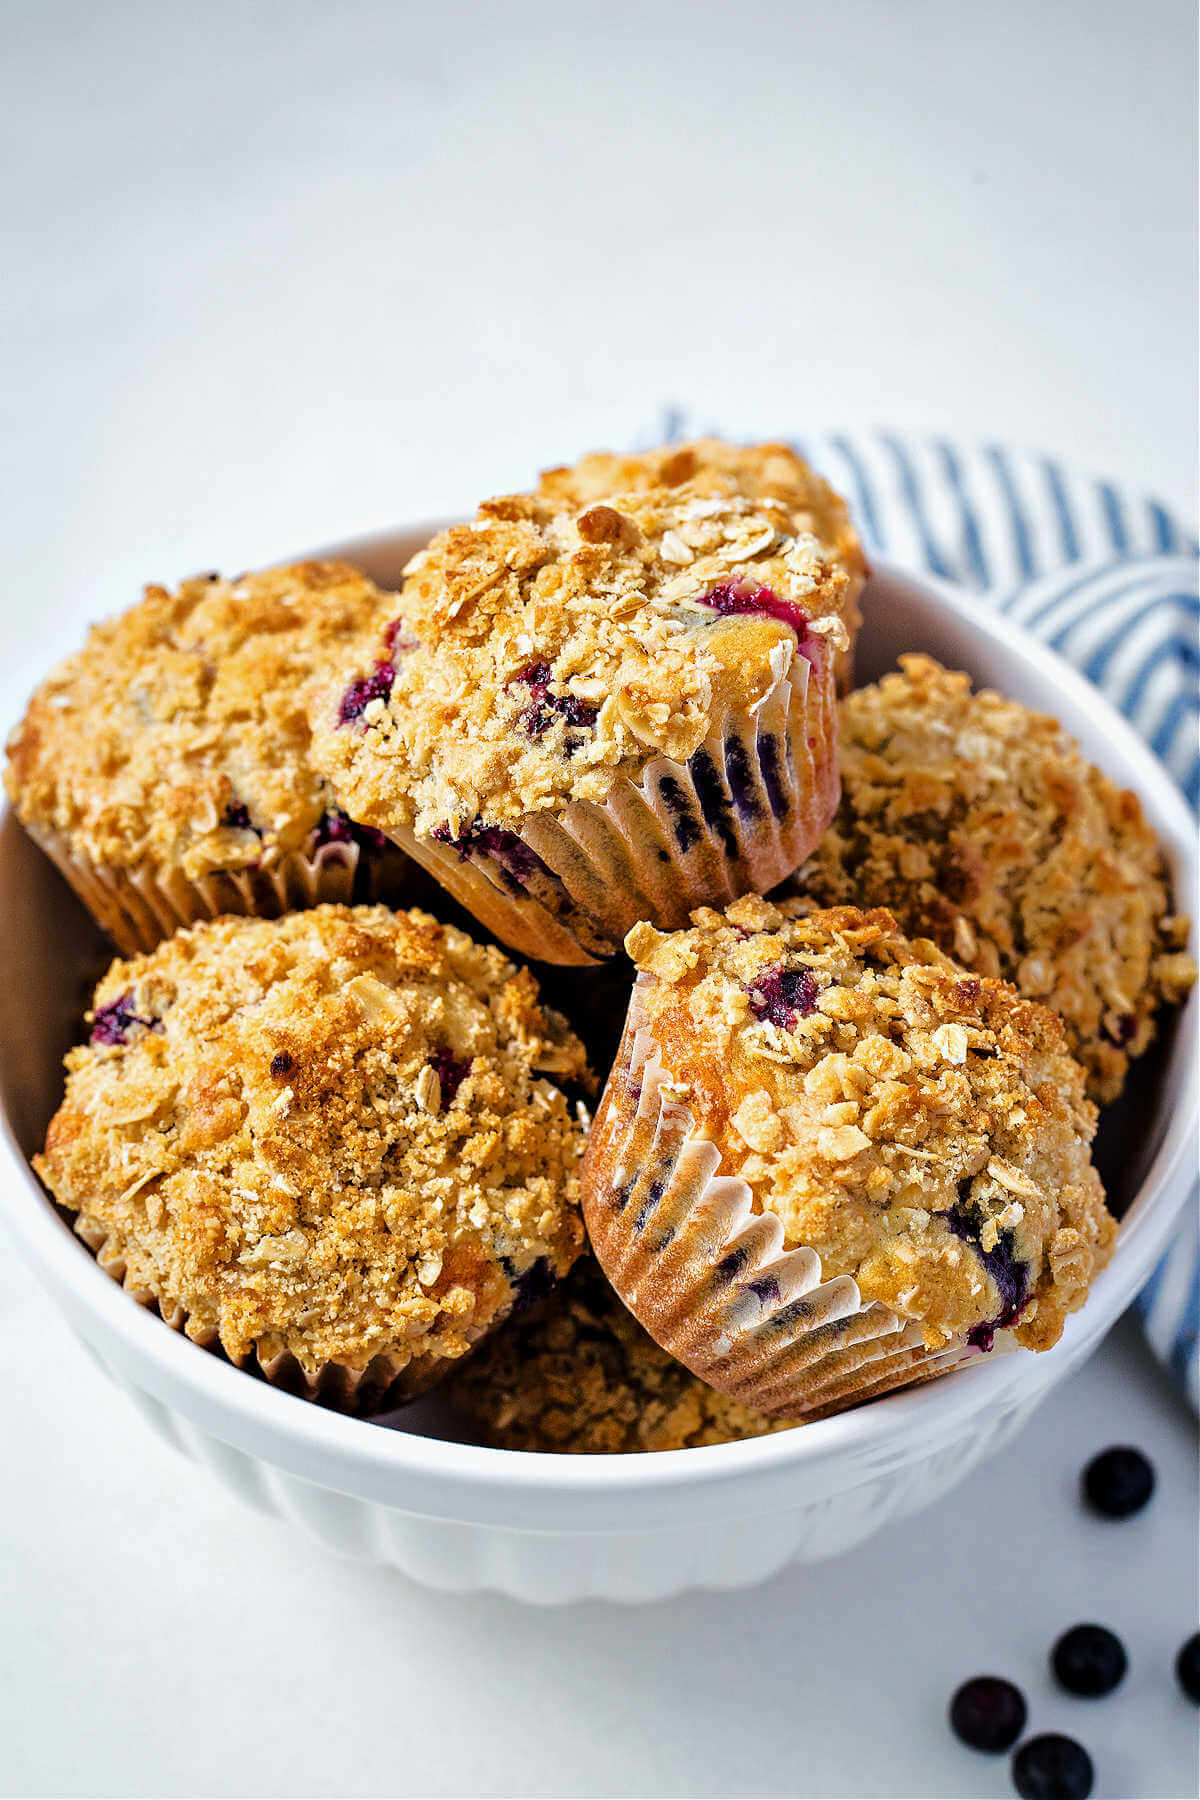 blueberry oatmeal muffins piled into a white bowl on a table.